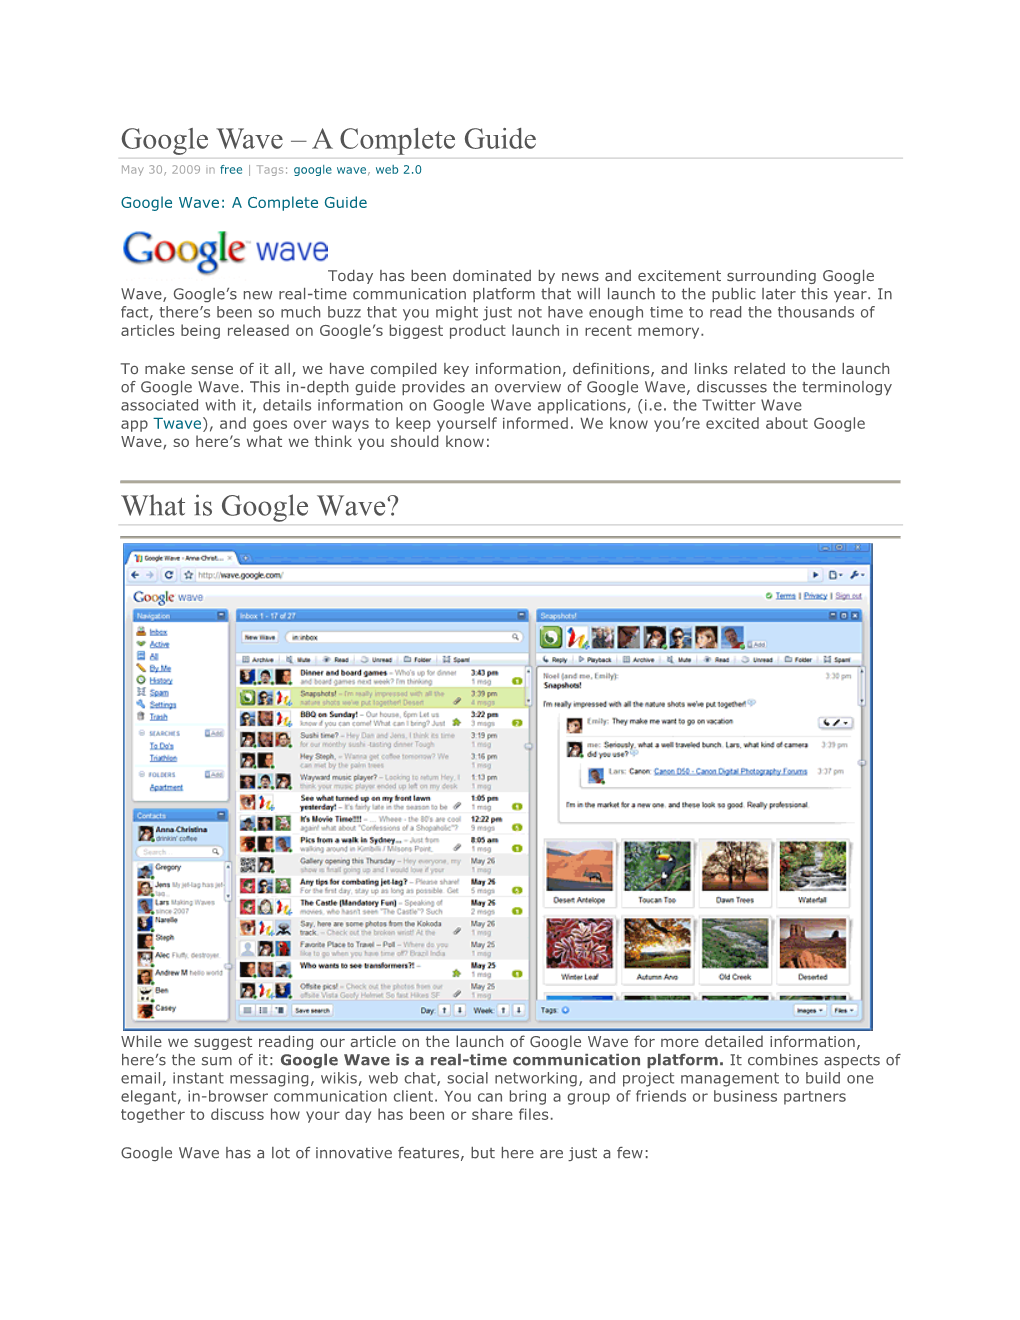 Google Wave – a Complete Guide May 30, 2009 in Free | Tags: Google Wave, Web 2.0